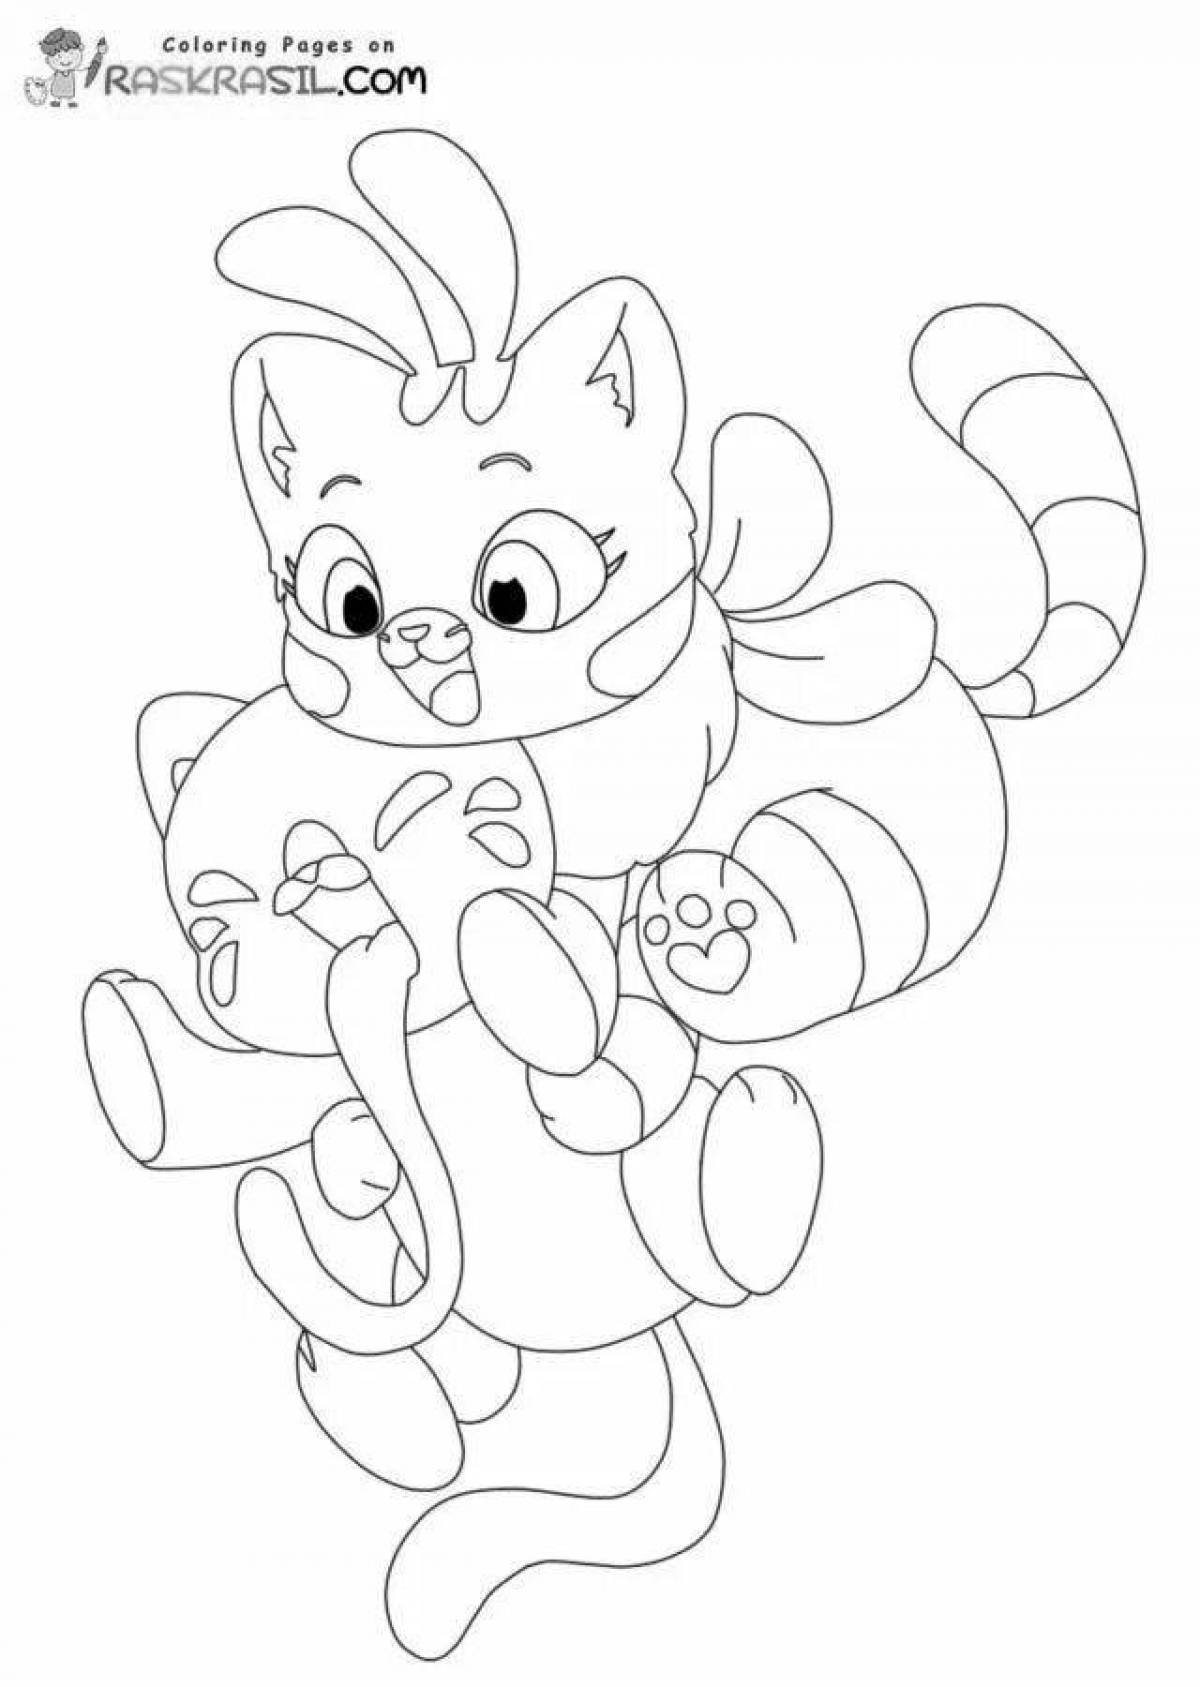 Adorable candy cat coloring page